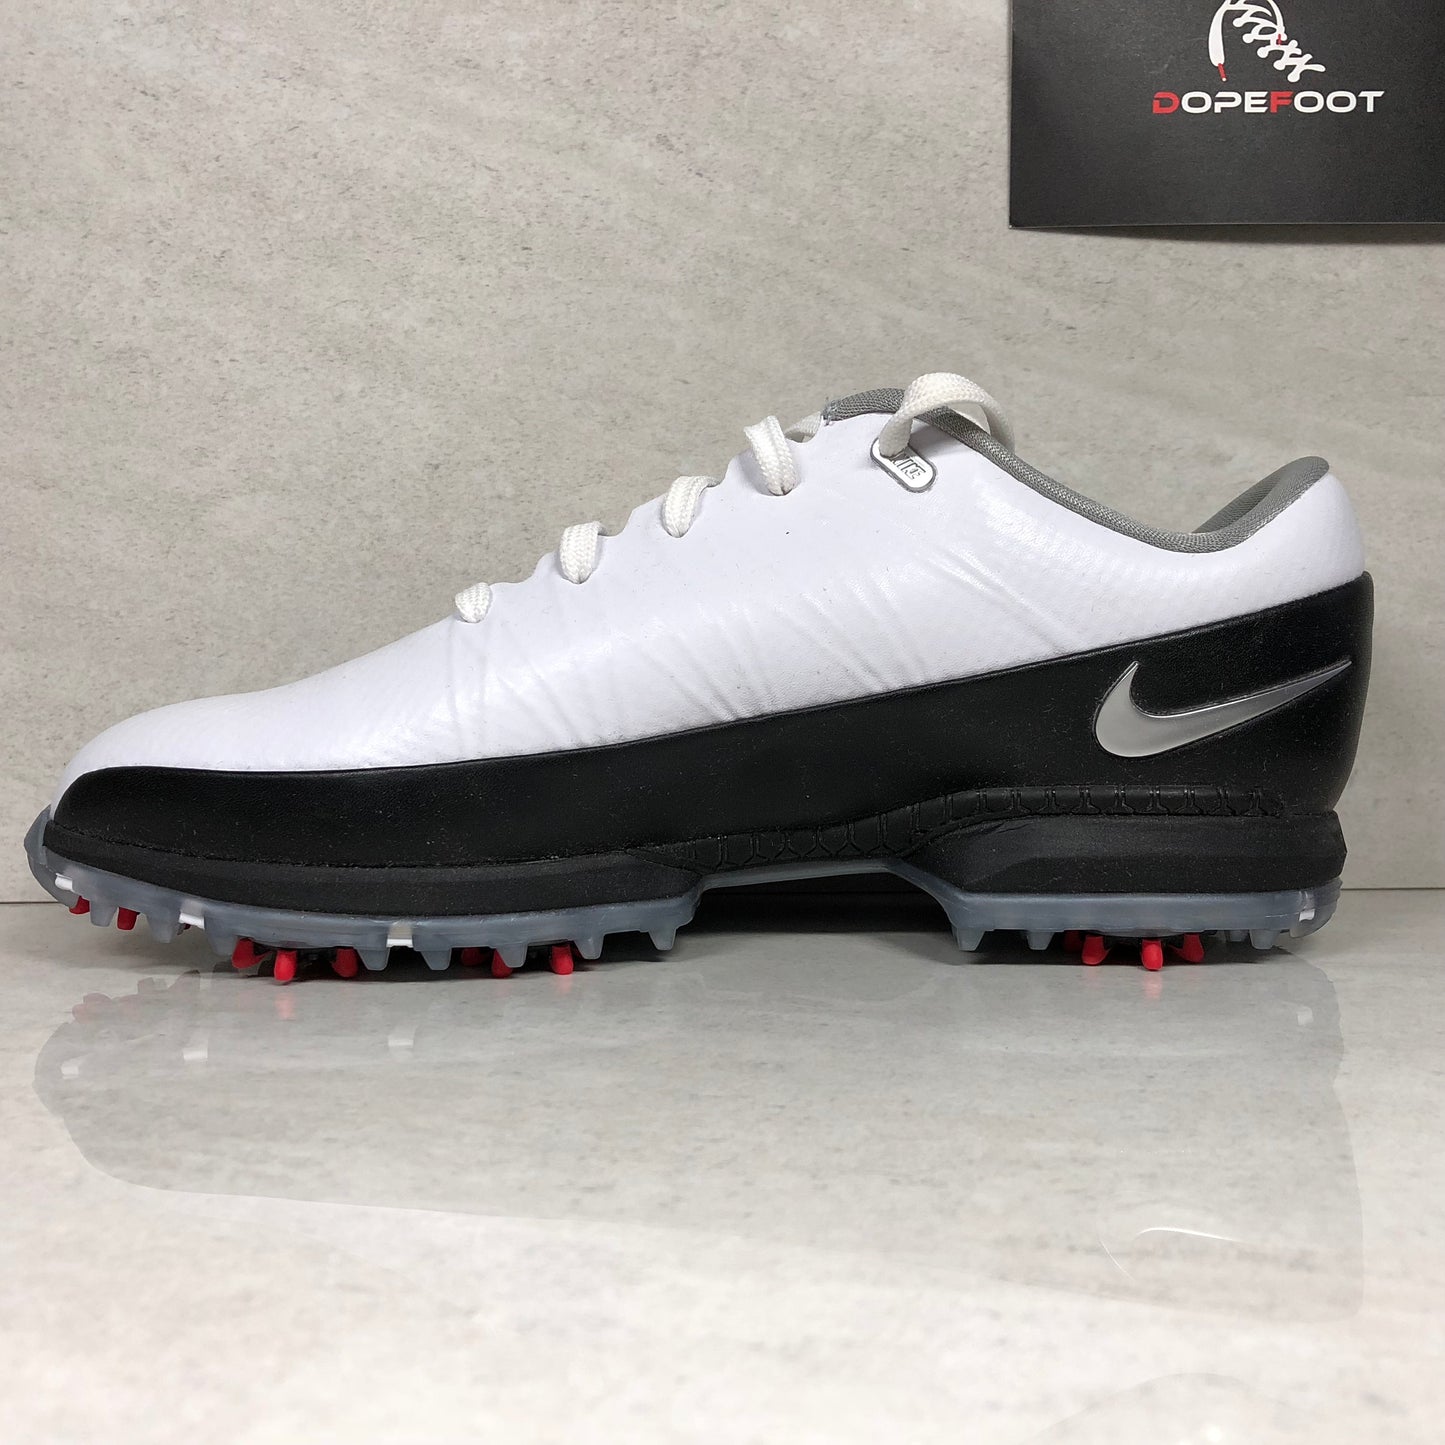 DS Nike Air Zoom Attack Chaussures de golf Taille 9 Blanc/Noir 853739 101